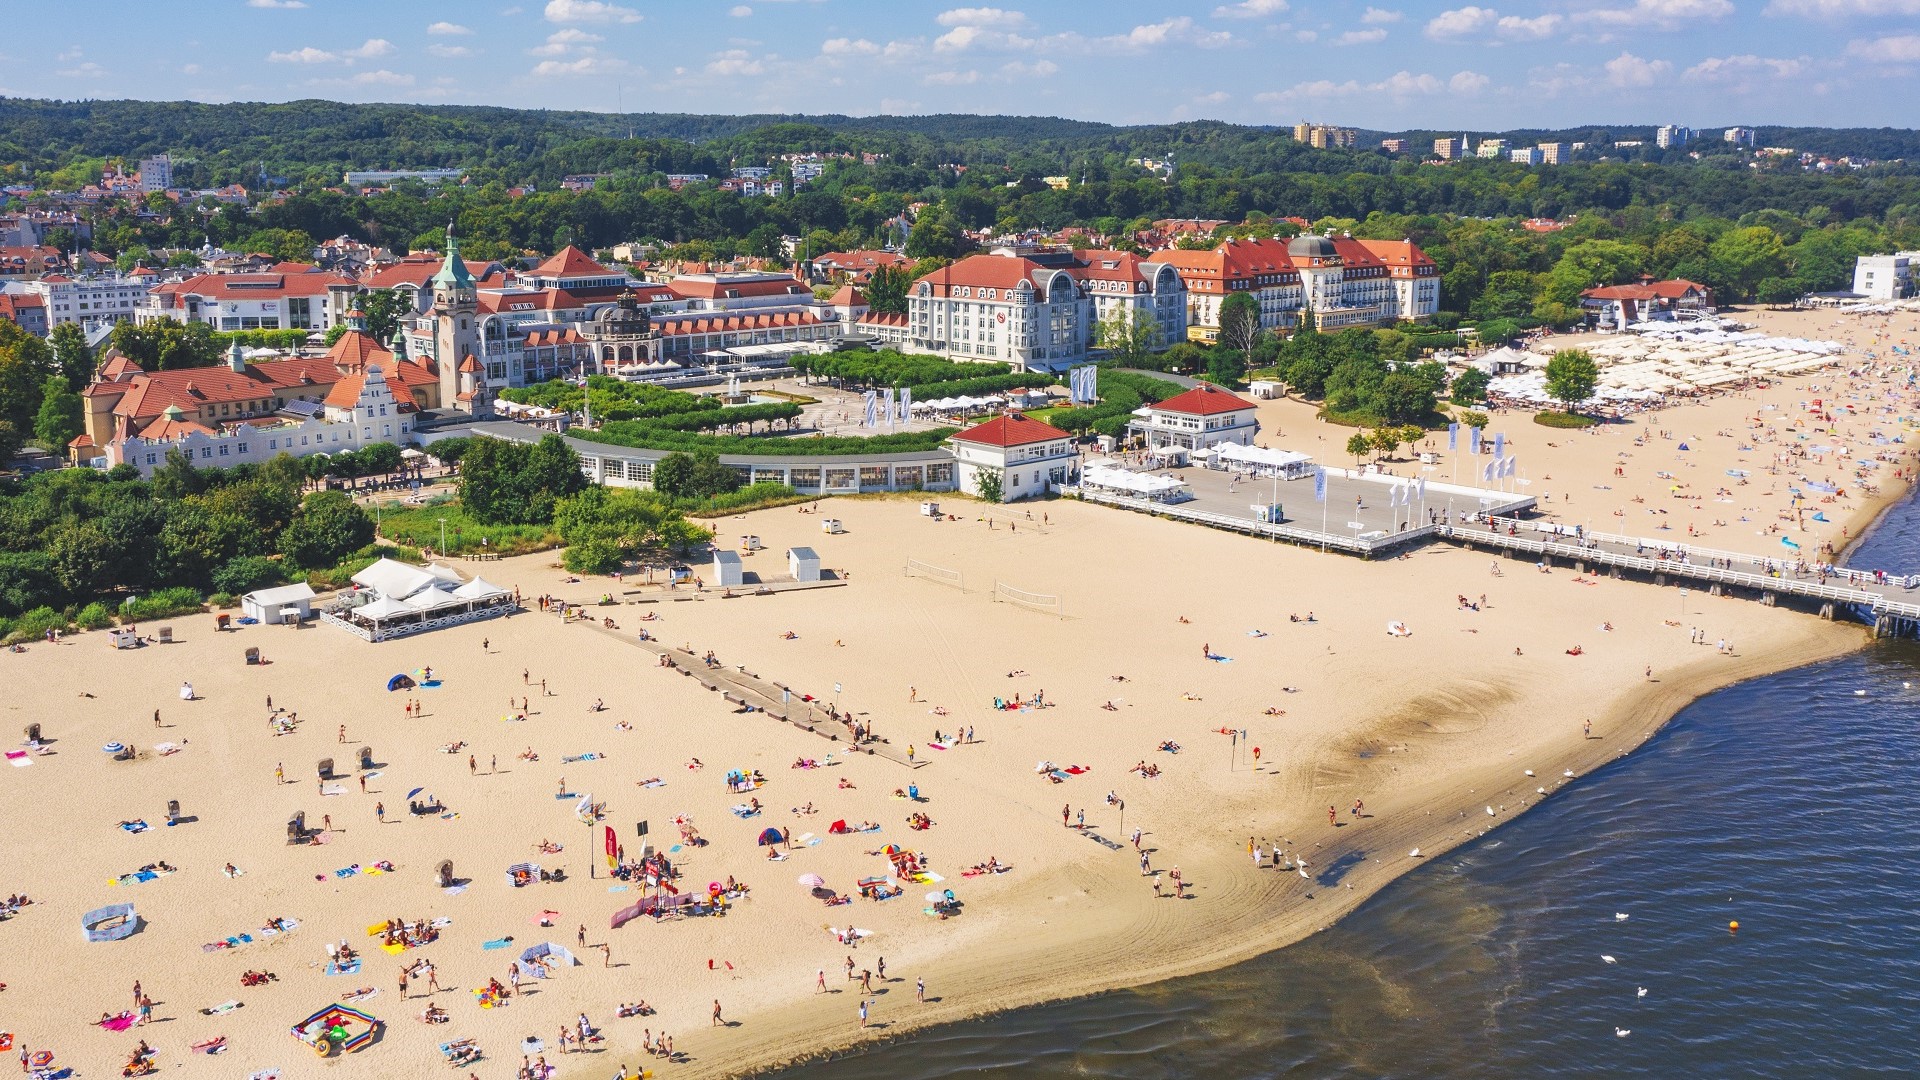 aerial view of the beach and pier at Sopot, Poland